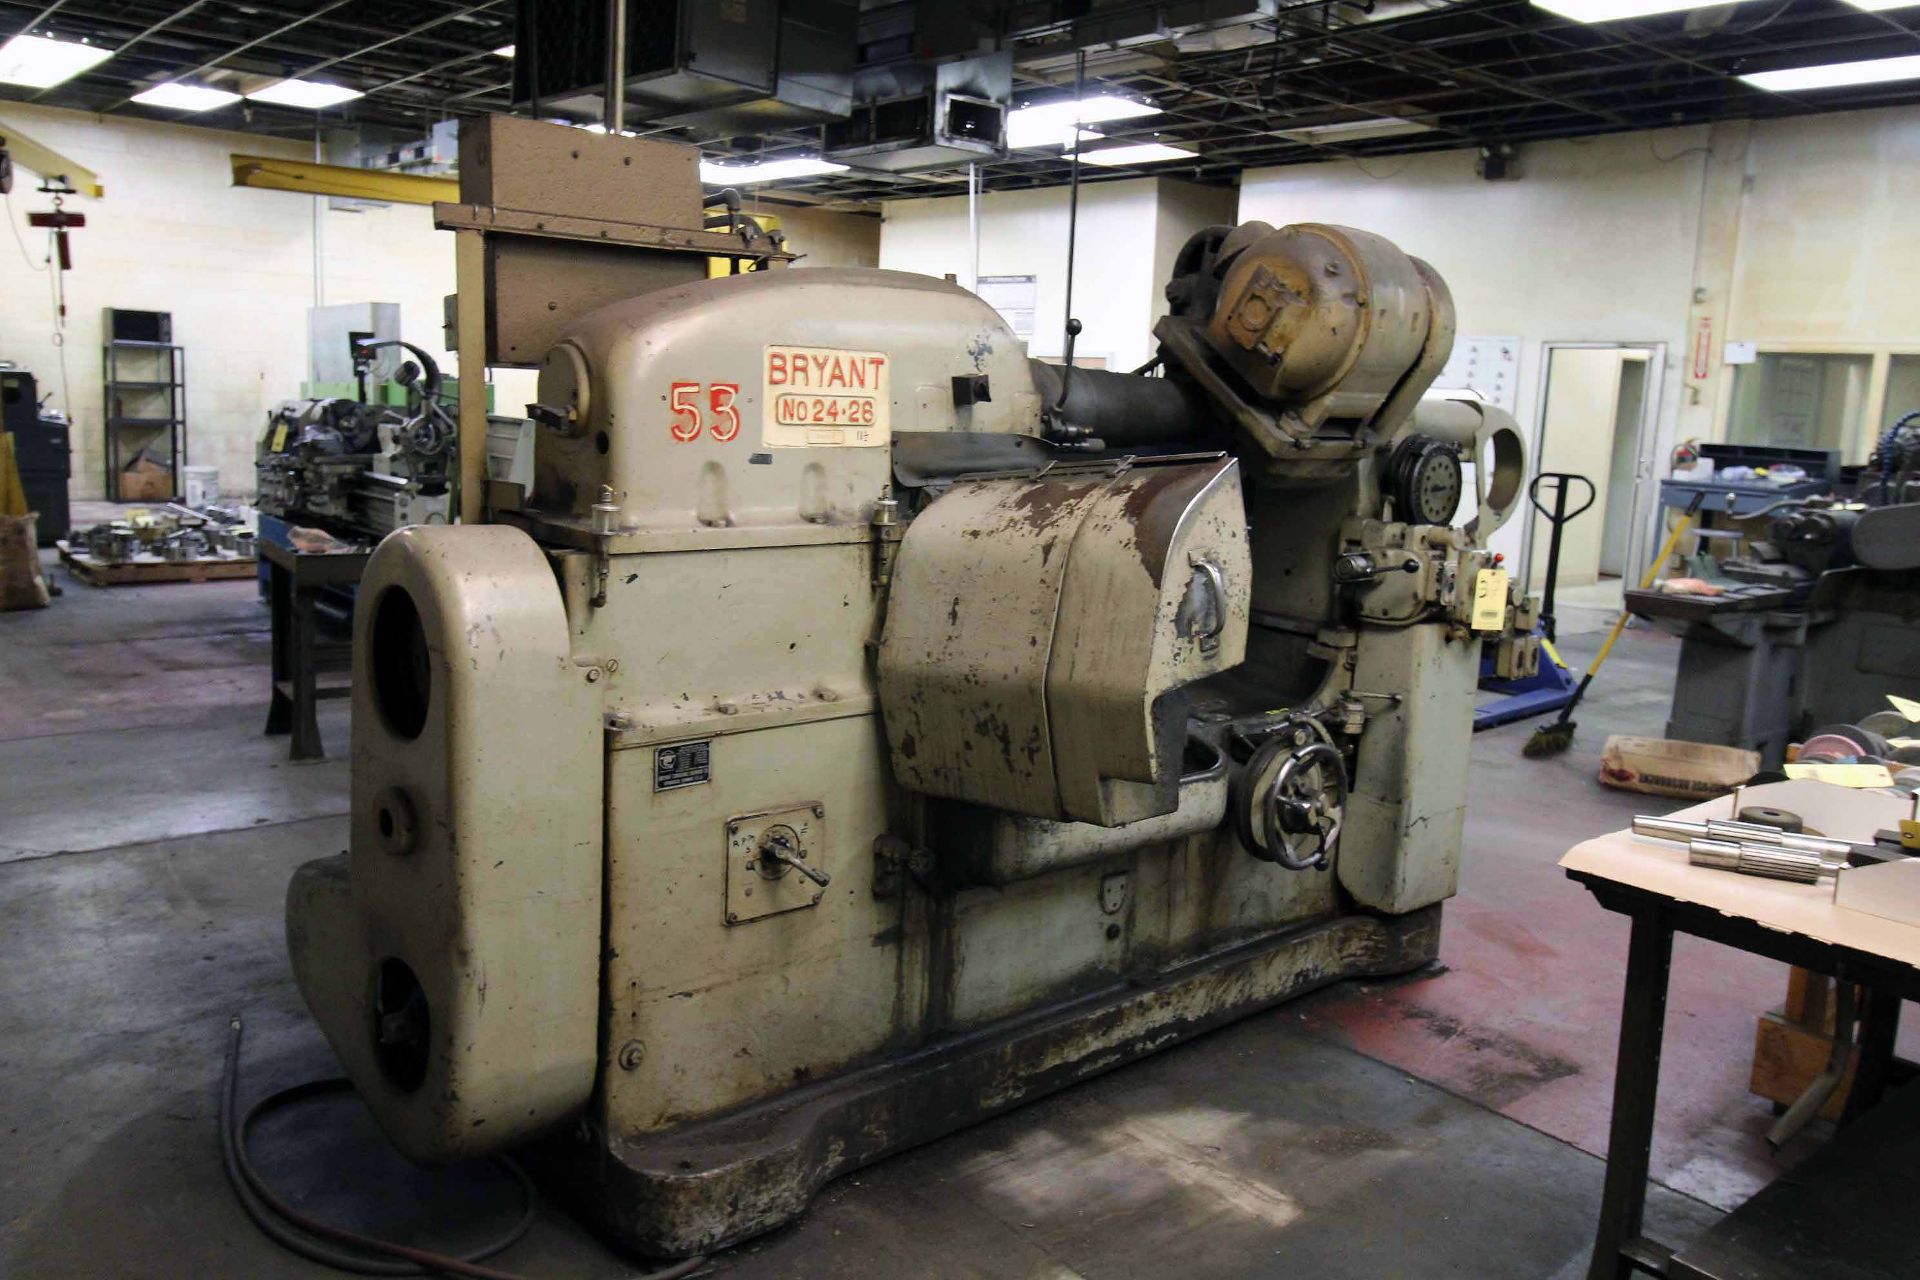 INTERNAL GRINDER, BRYANT NO. 24-26, 15 HP grinding spdl. drive, 18” dia. 6-jaw chuck, auto. - Image 7 of 8